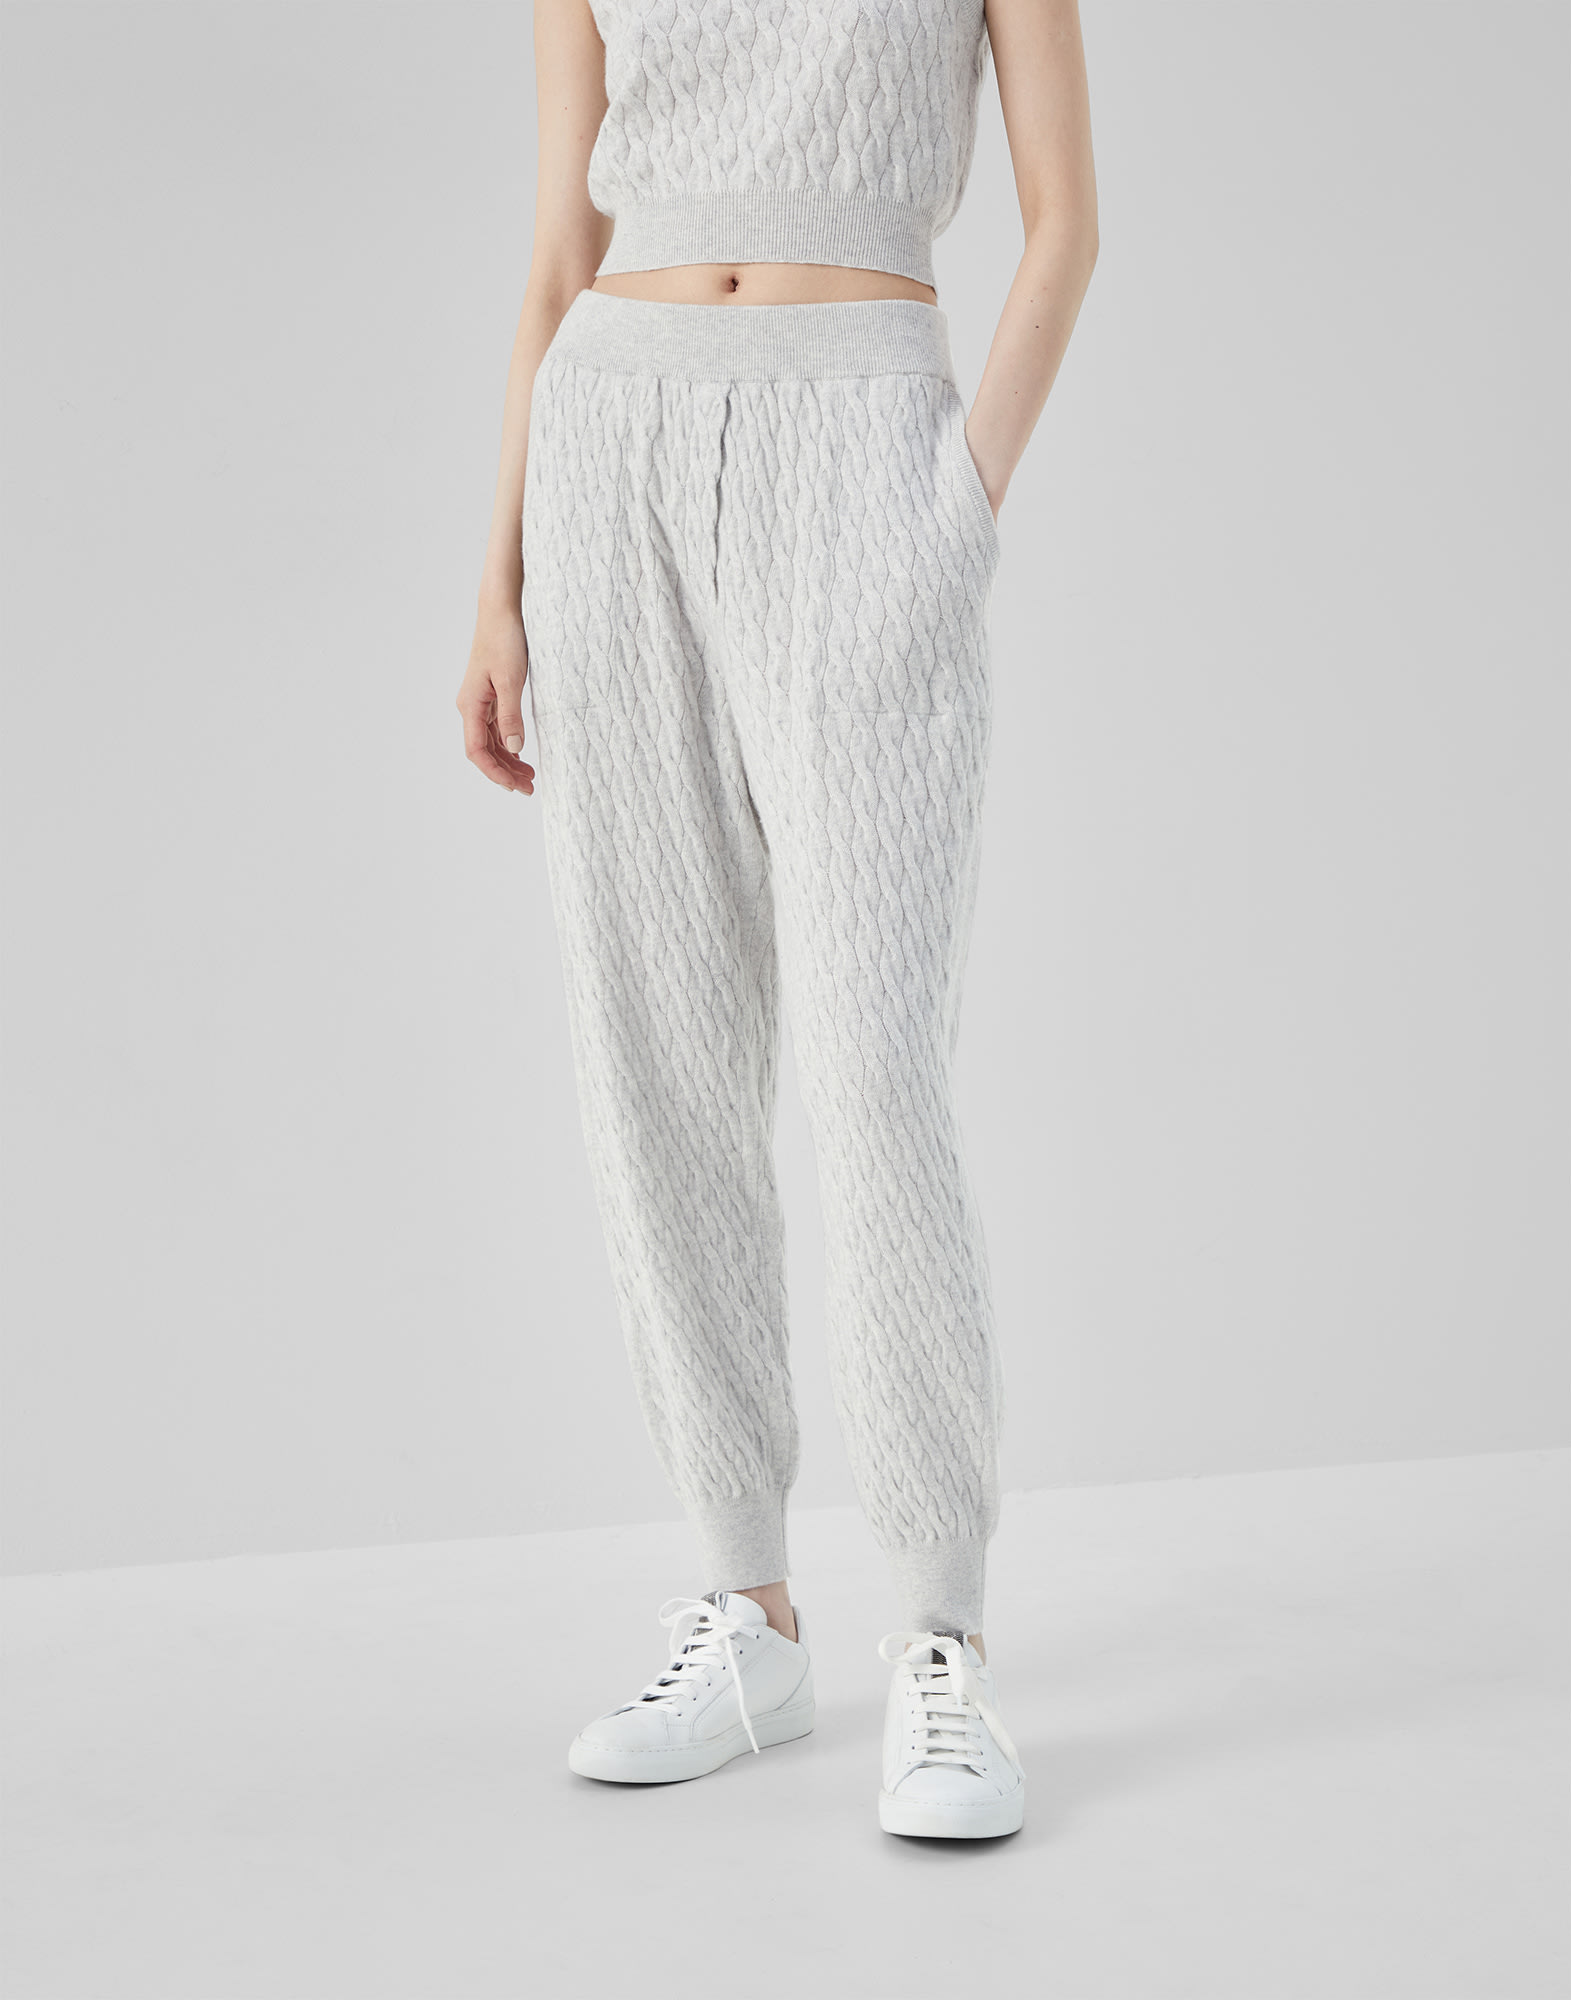 Cashmere knit trousers